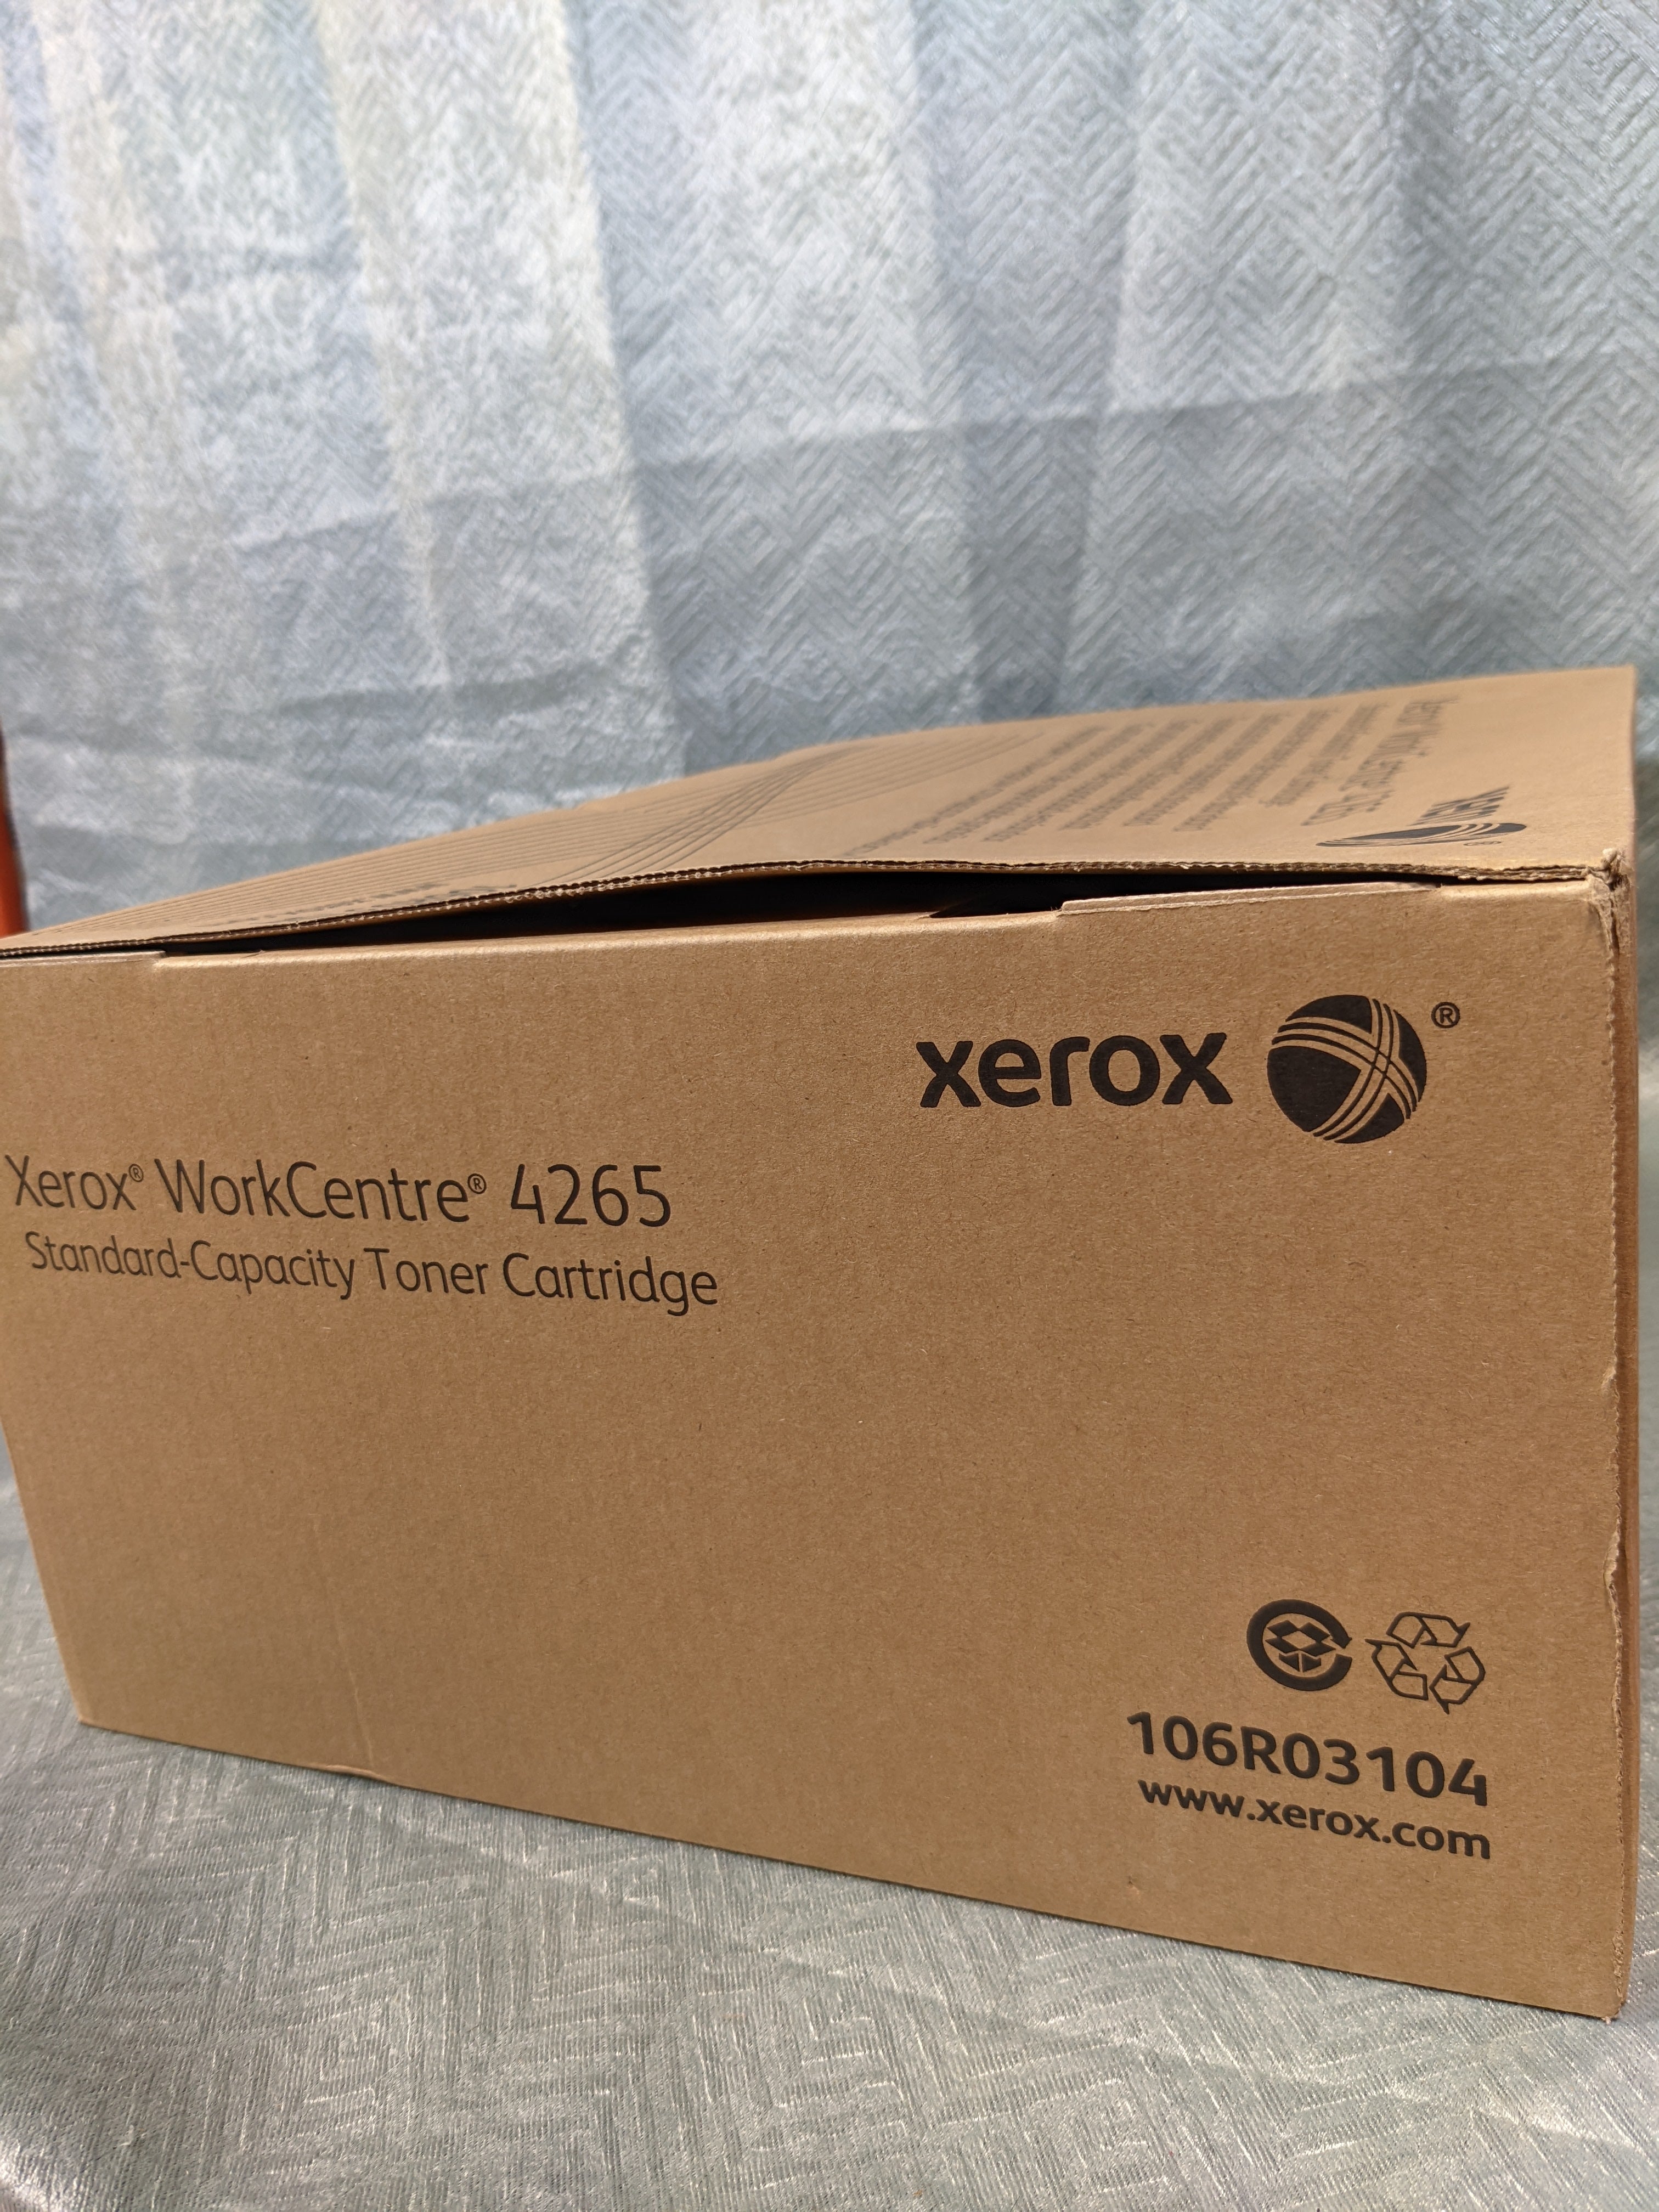 Xerox WorkCentre 4265 Black Toner-Cartridge (10,000 Pages) - 106R03104 (7591861747950)